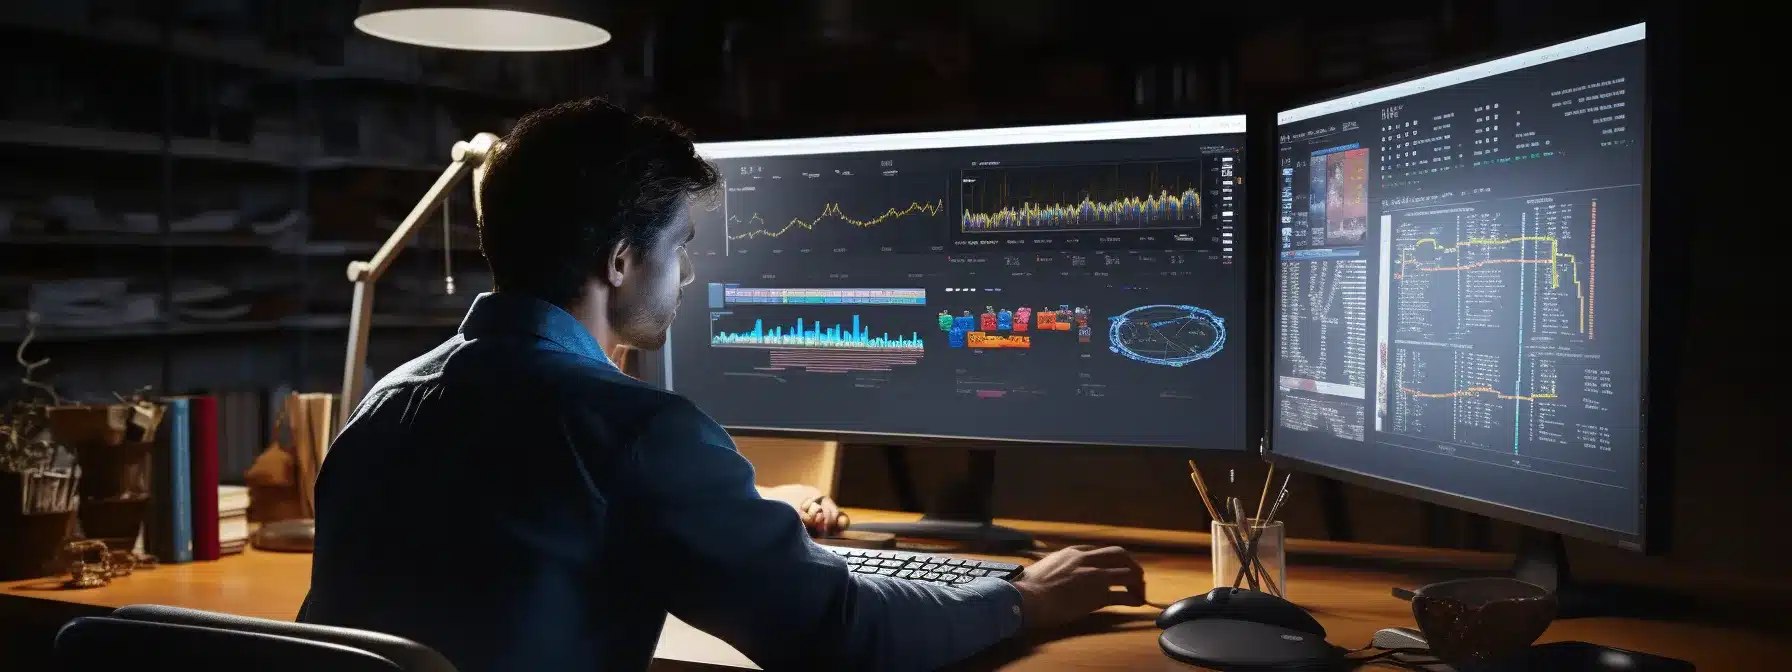 A Person Sitting At A Desk, Surrounded By Various Monitors Displaying Data Analytics And Social Media Metrics, With A Notepad And Pencil In Hand.